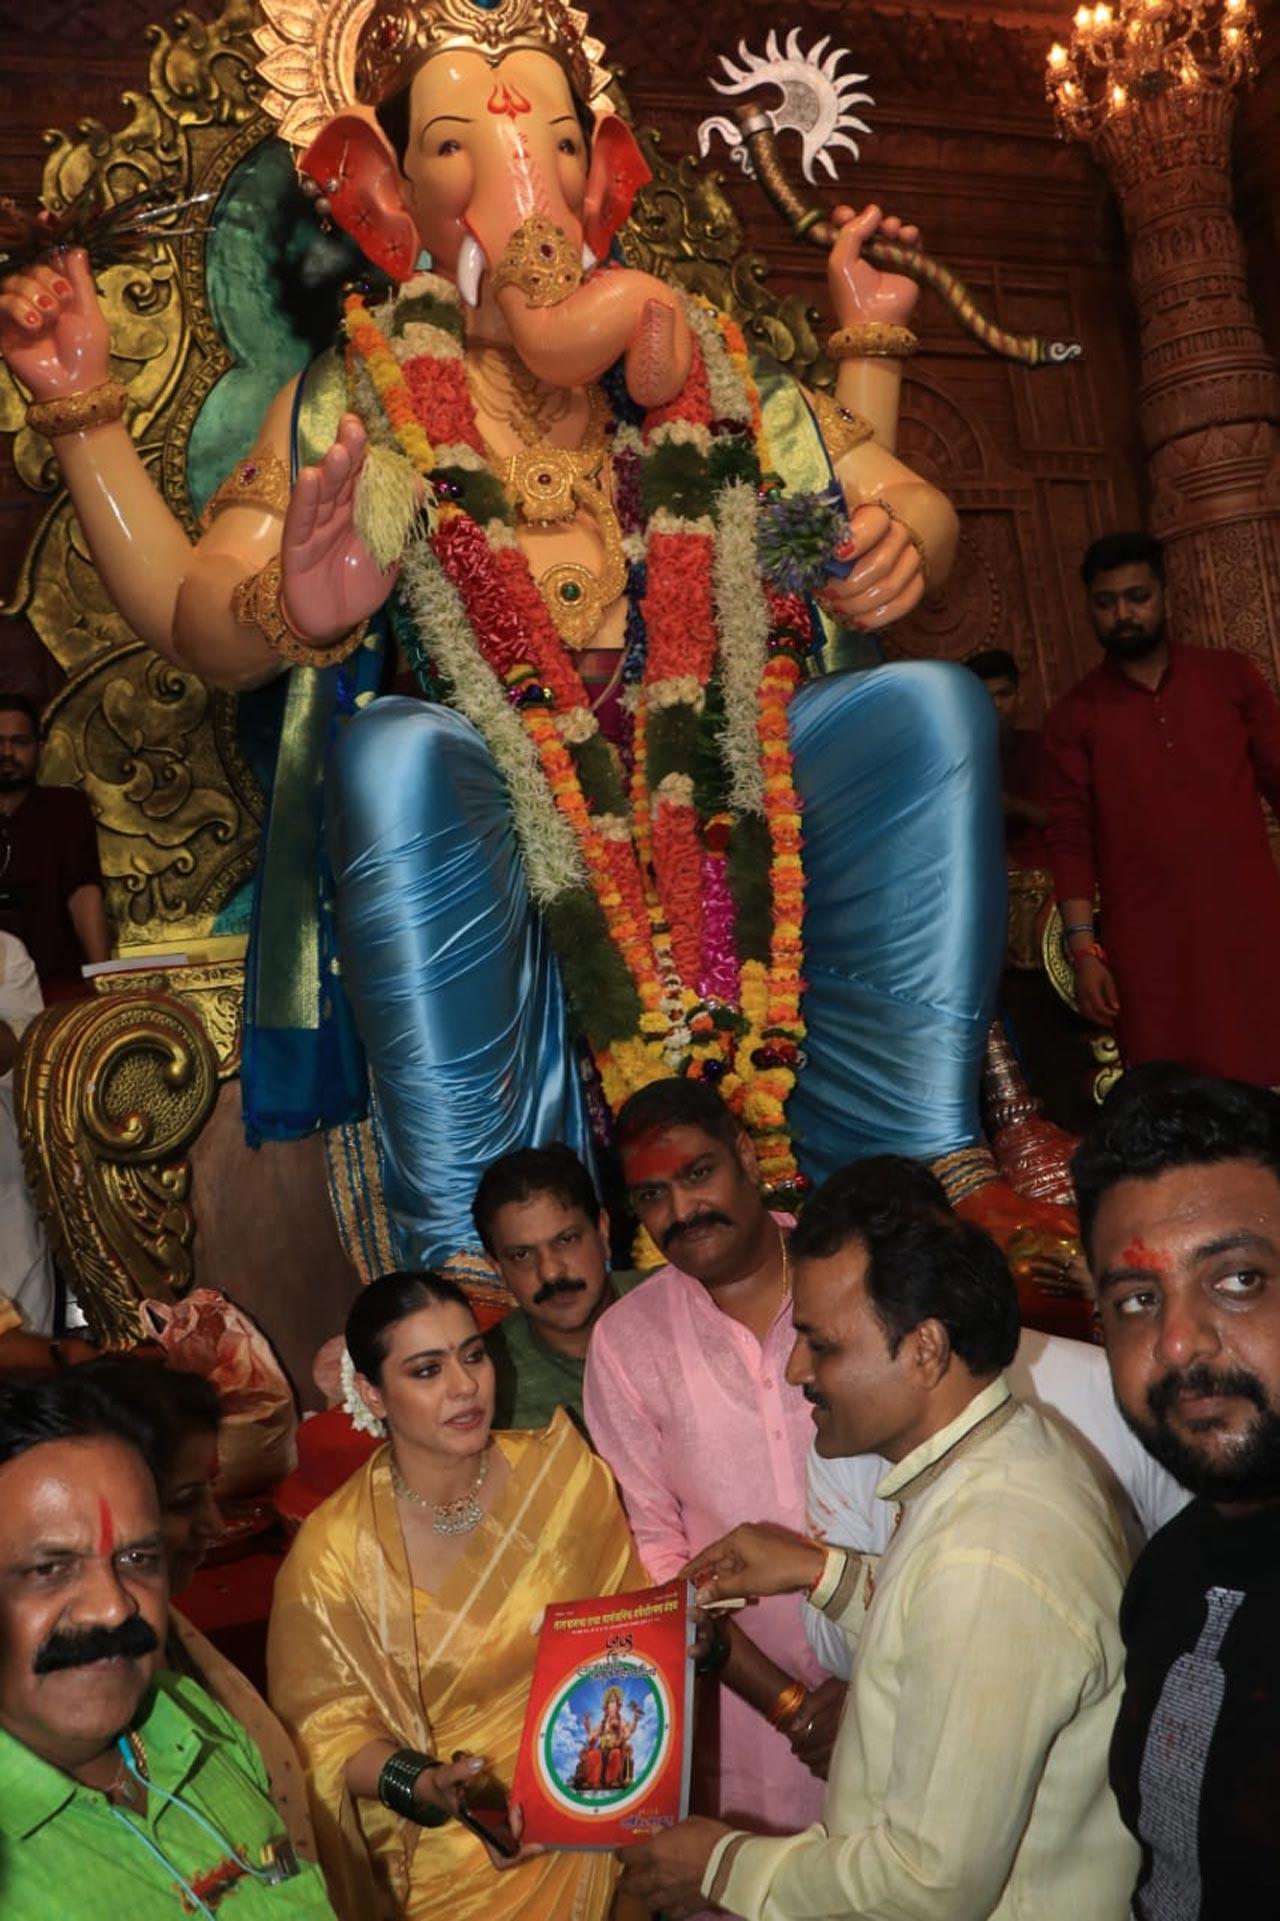 Kajol wore a choker necklace and green bangles to complete her look and can be seen smiling, laughing, and looking surprised as she posed for the camera
Also View: Ganeshotsav 2022: Amit Shah, Eknath Shinde, Devendra Fadnavis offer prayers at Mumbai's Lalbaugcha Raja